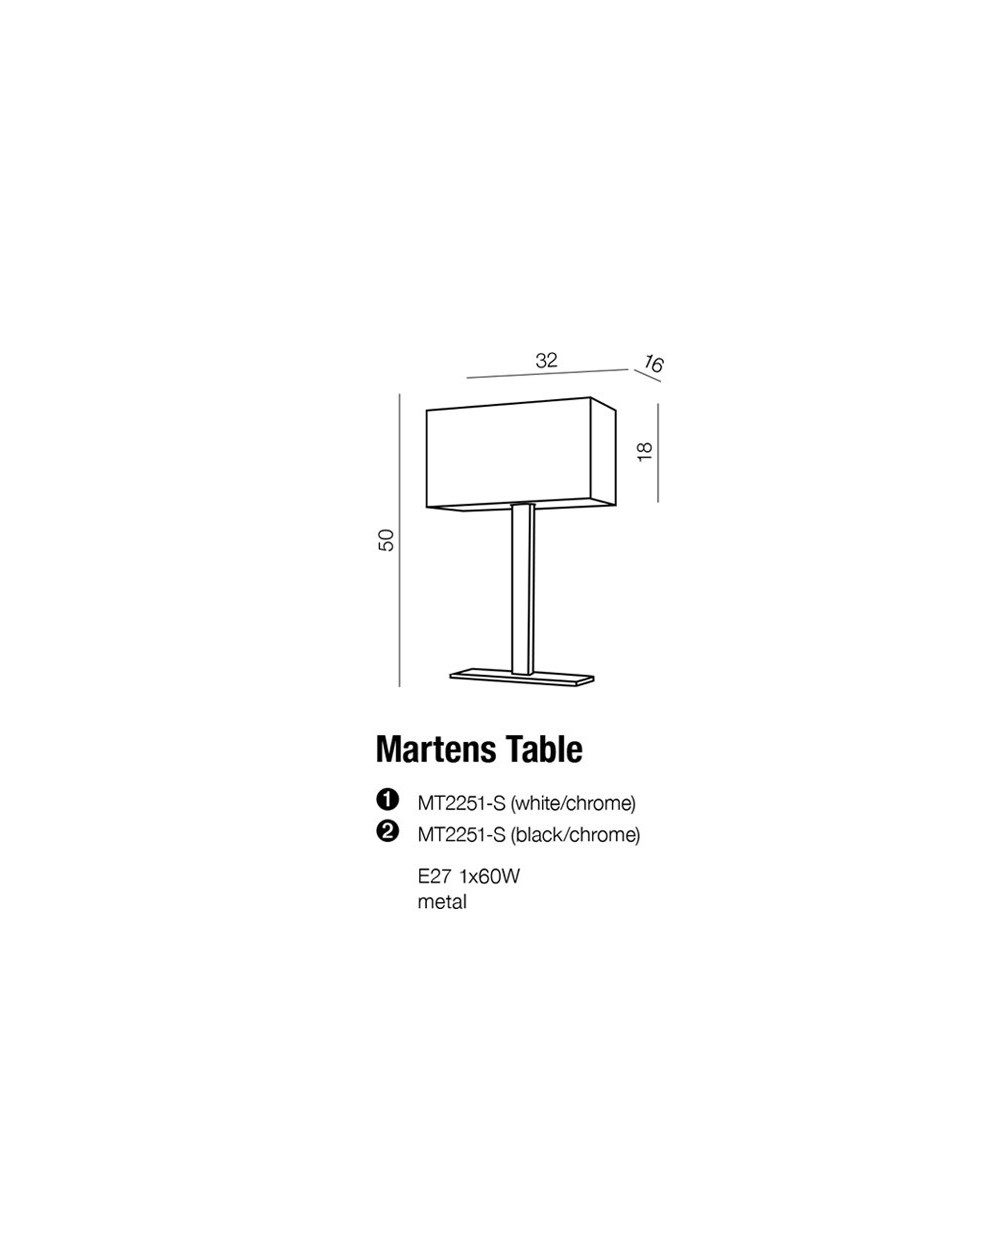 MARTENS TABLE